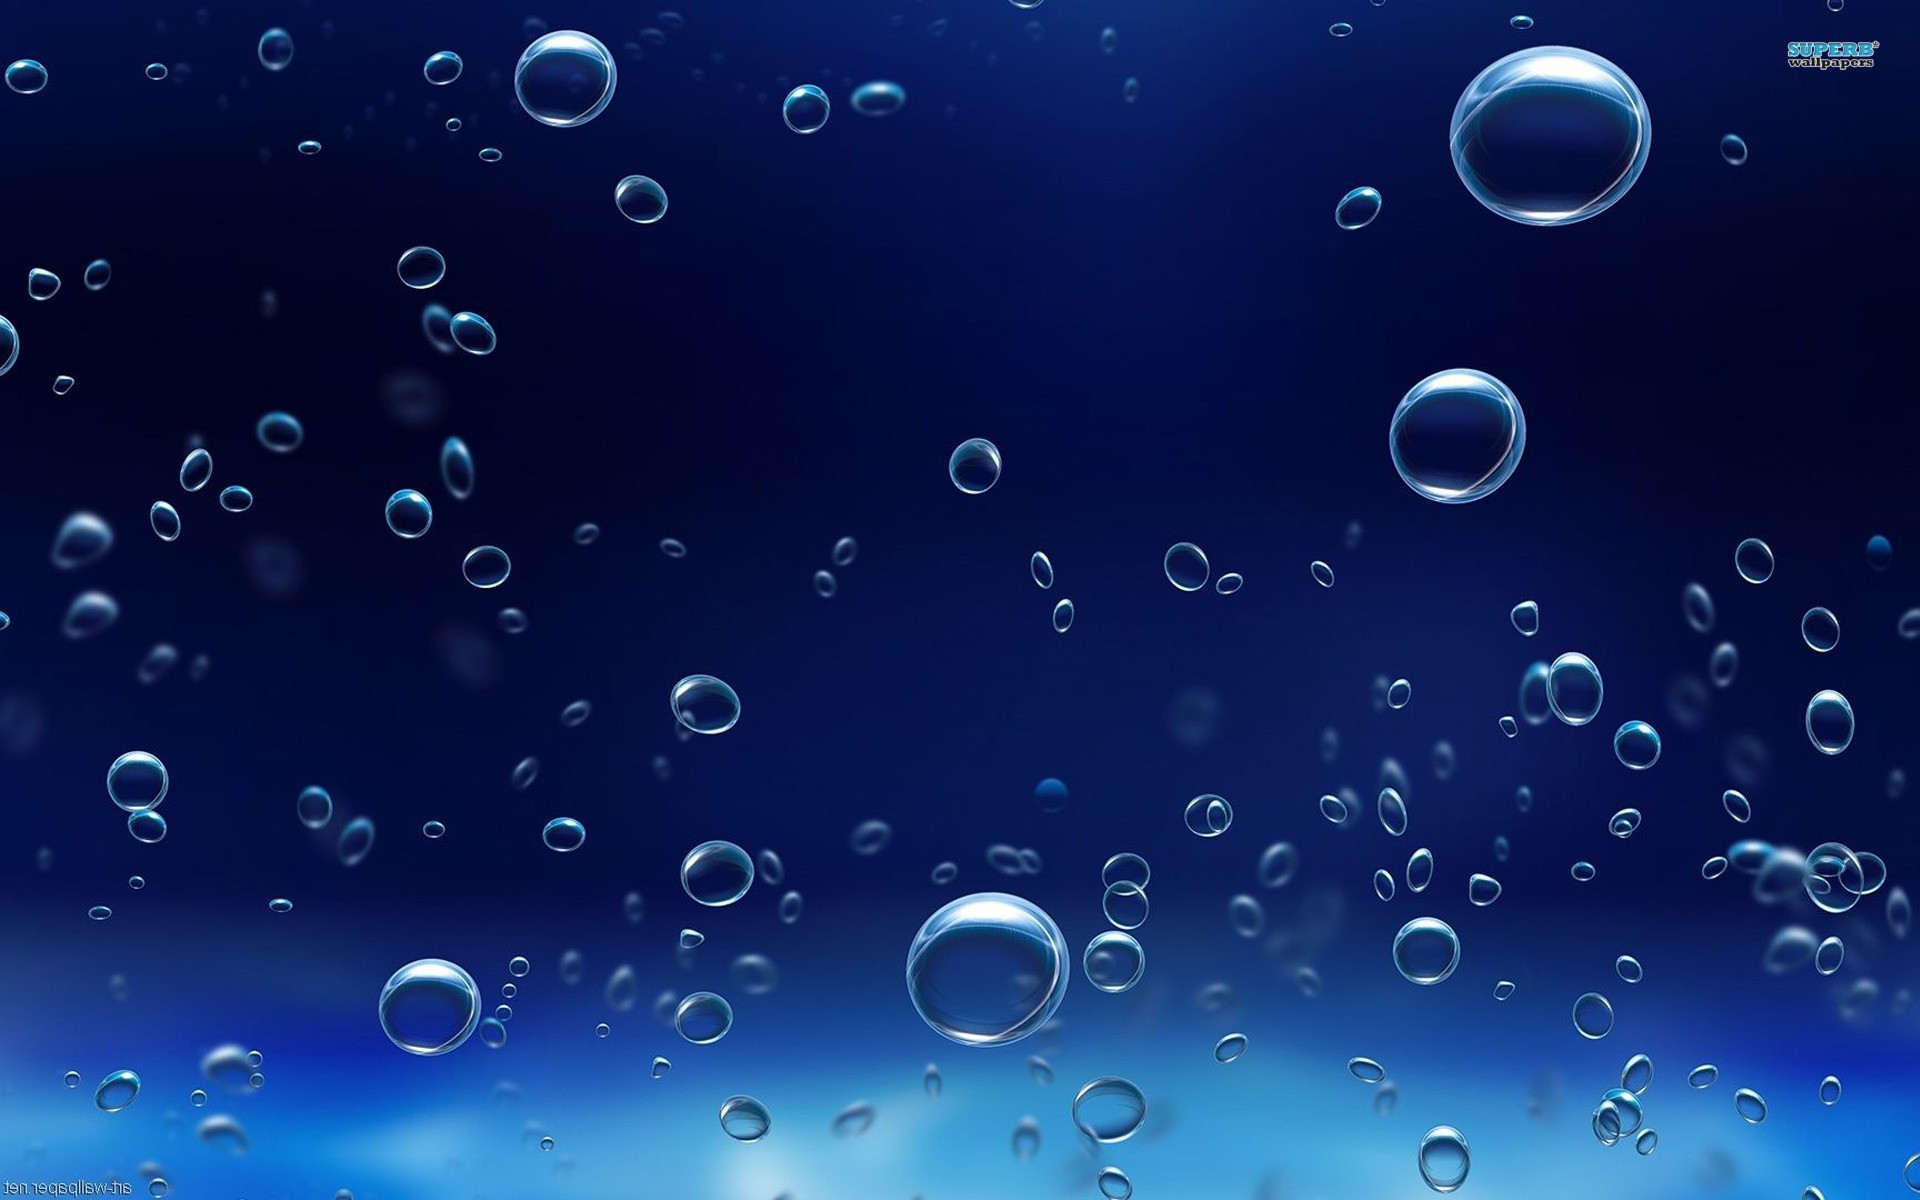 Bubbles on a blue background wallpapers and images   wallpapers